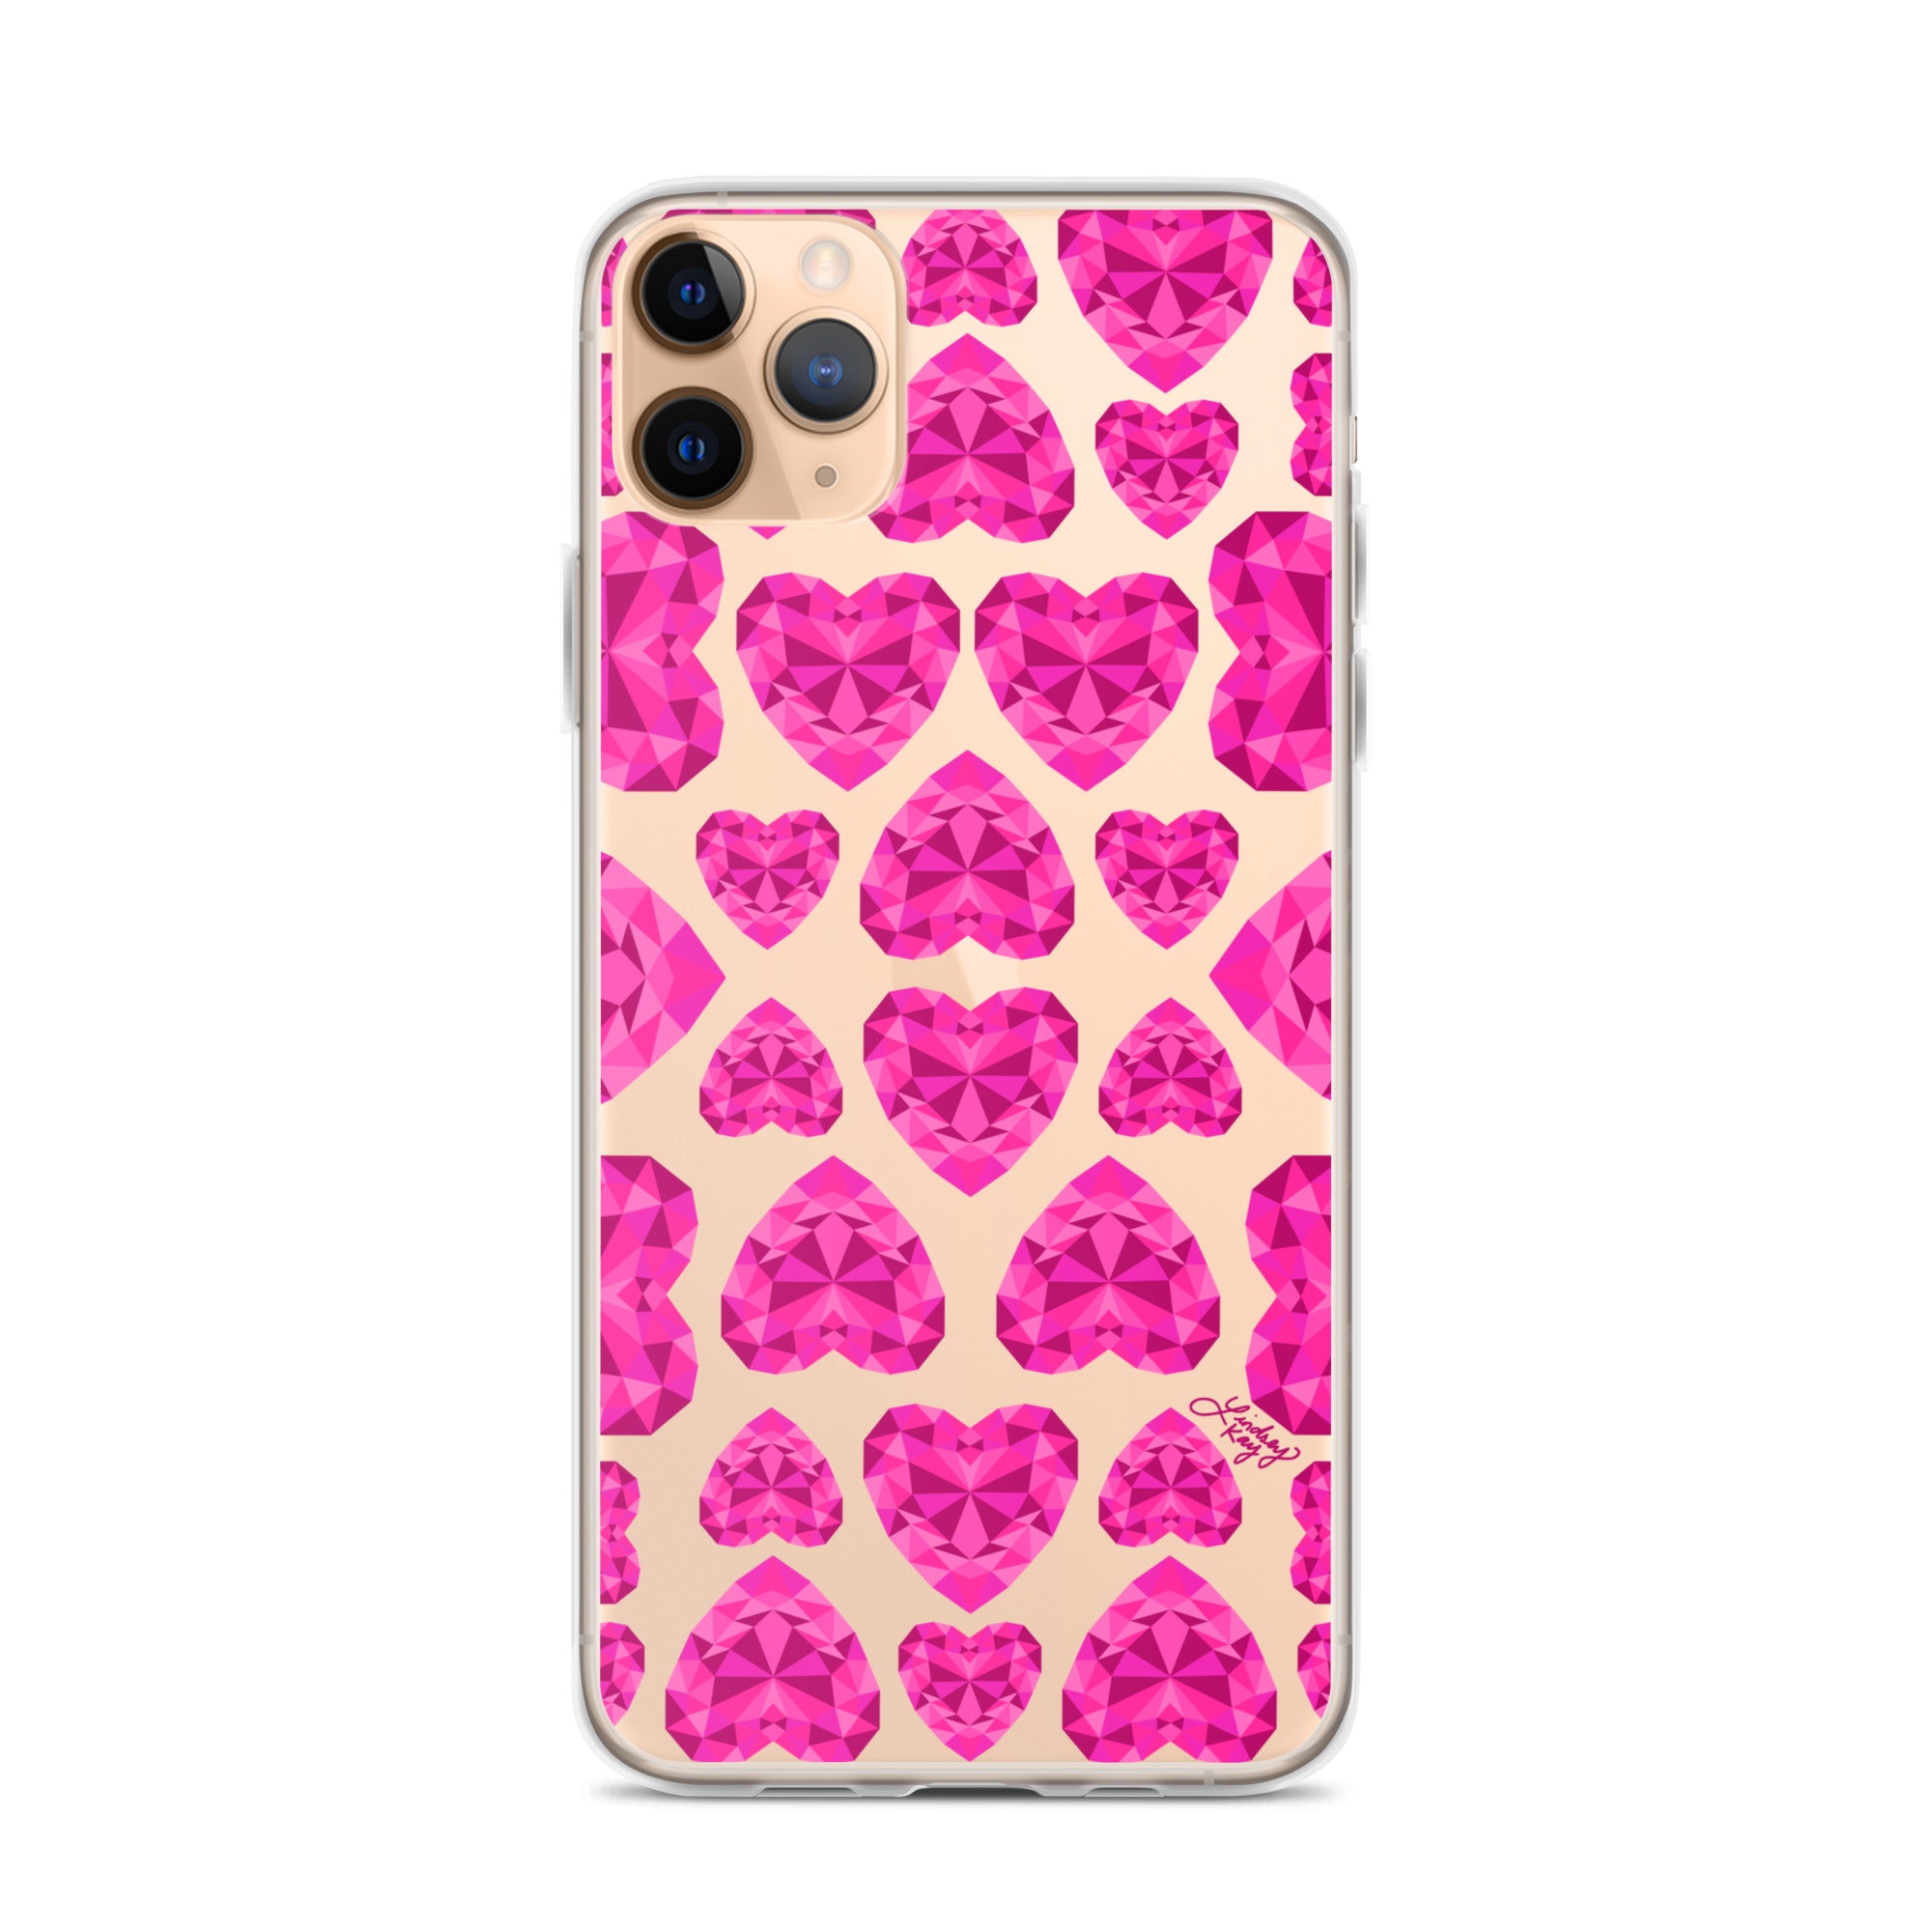 pink jewel valentines-day valentines-gifts illustration pattern feminine mobile accessories trend iphone-case phone case clear-phone-case lindsey kay collective